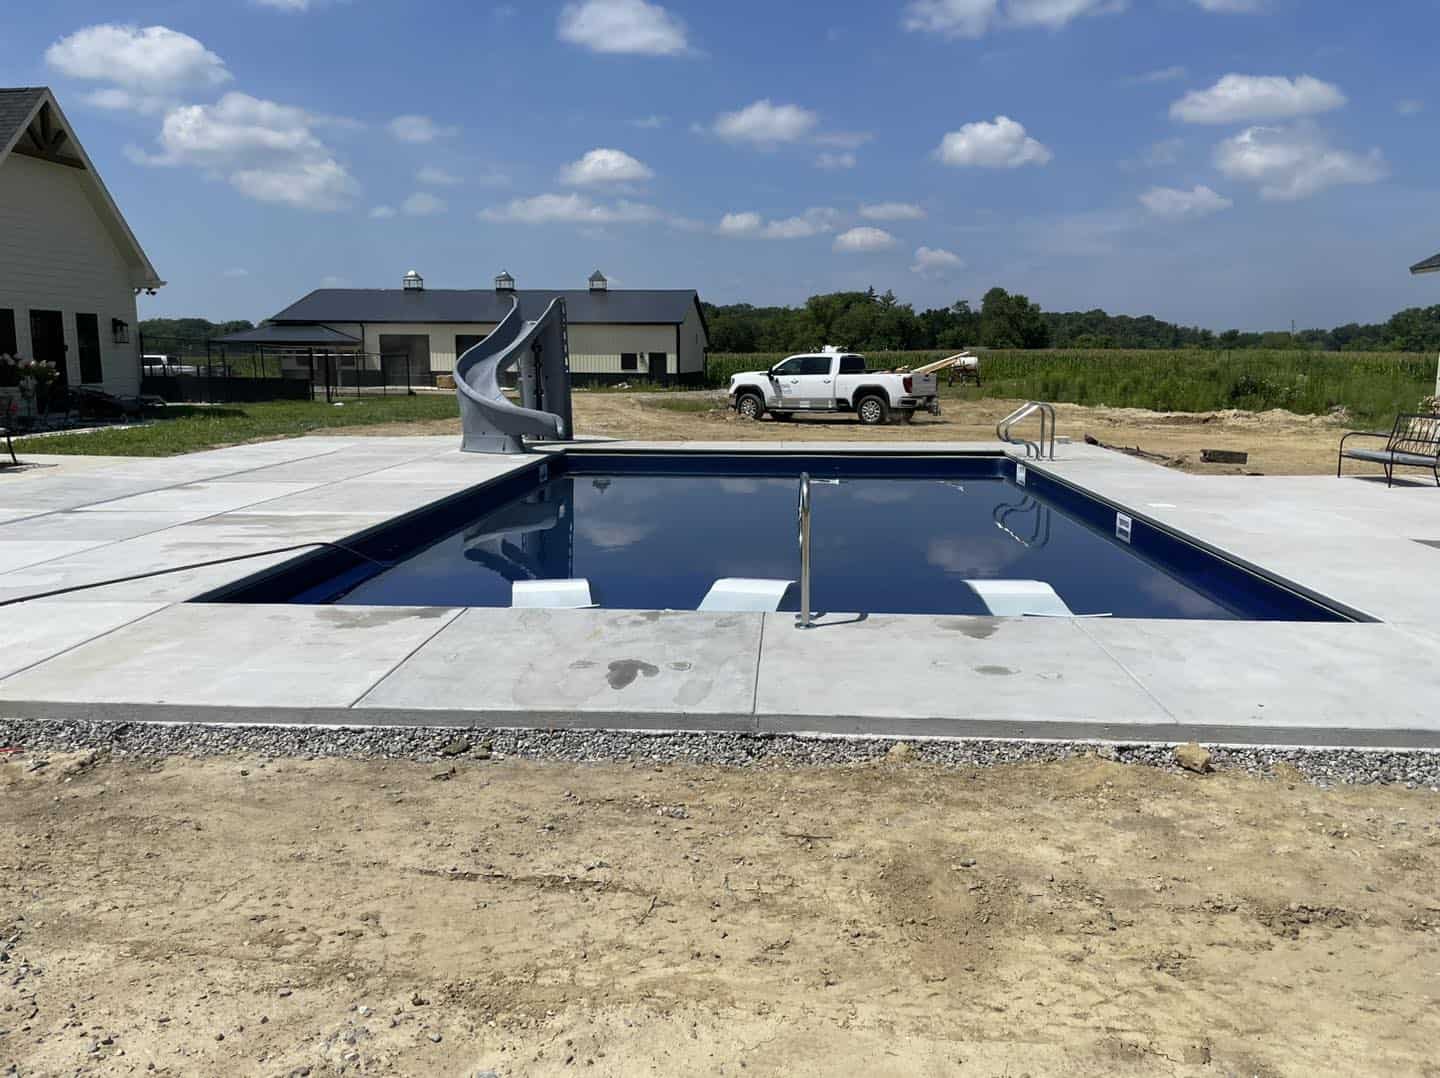 A swimming pool is being built in a backyard.